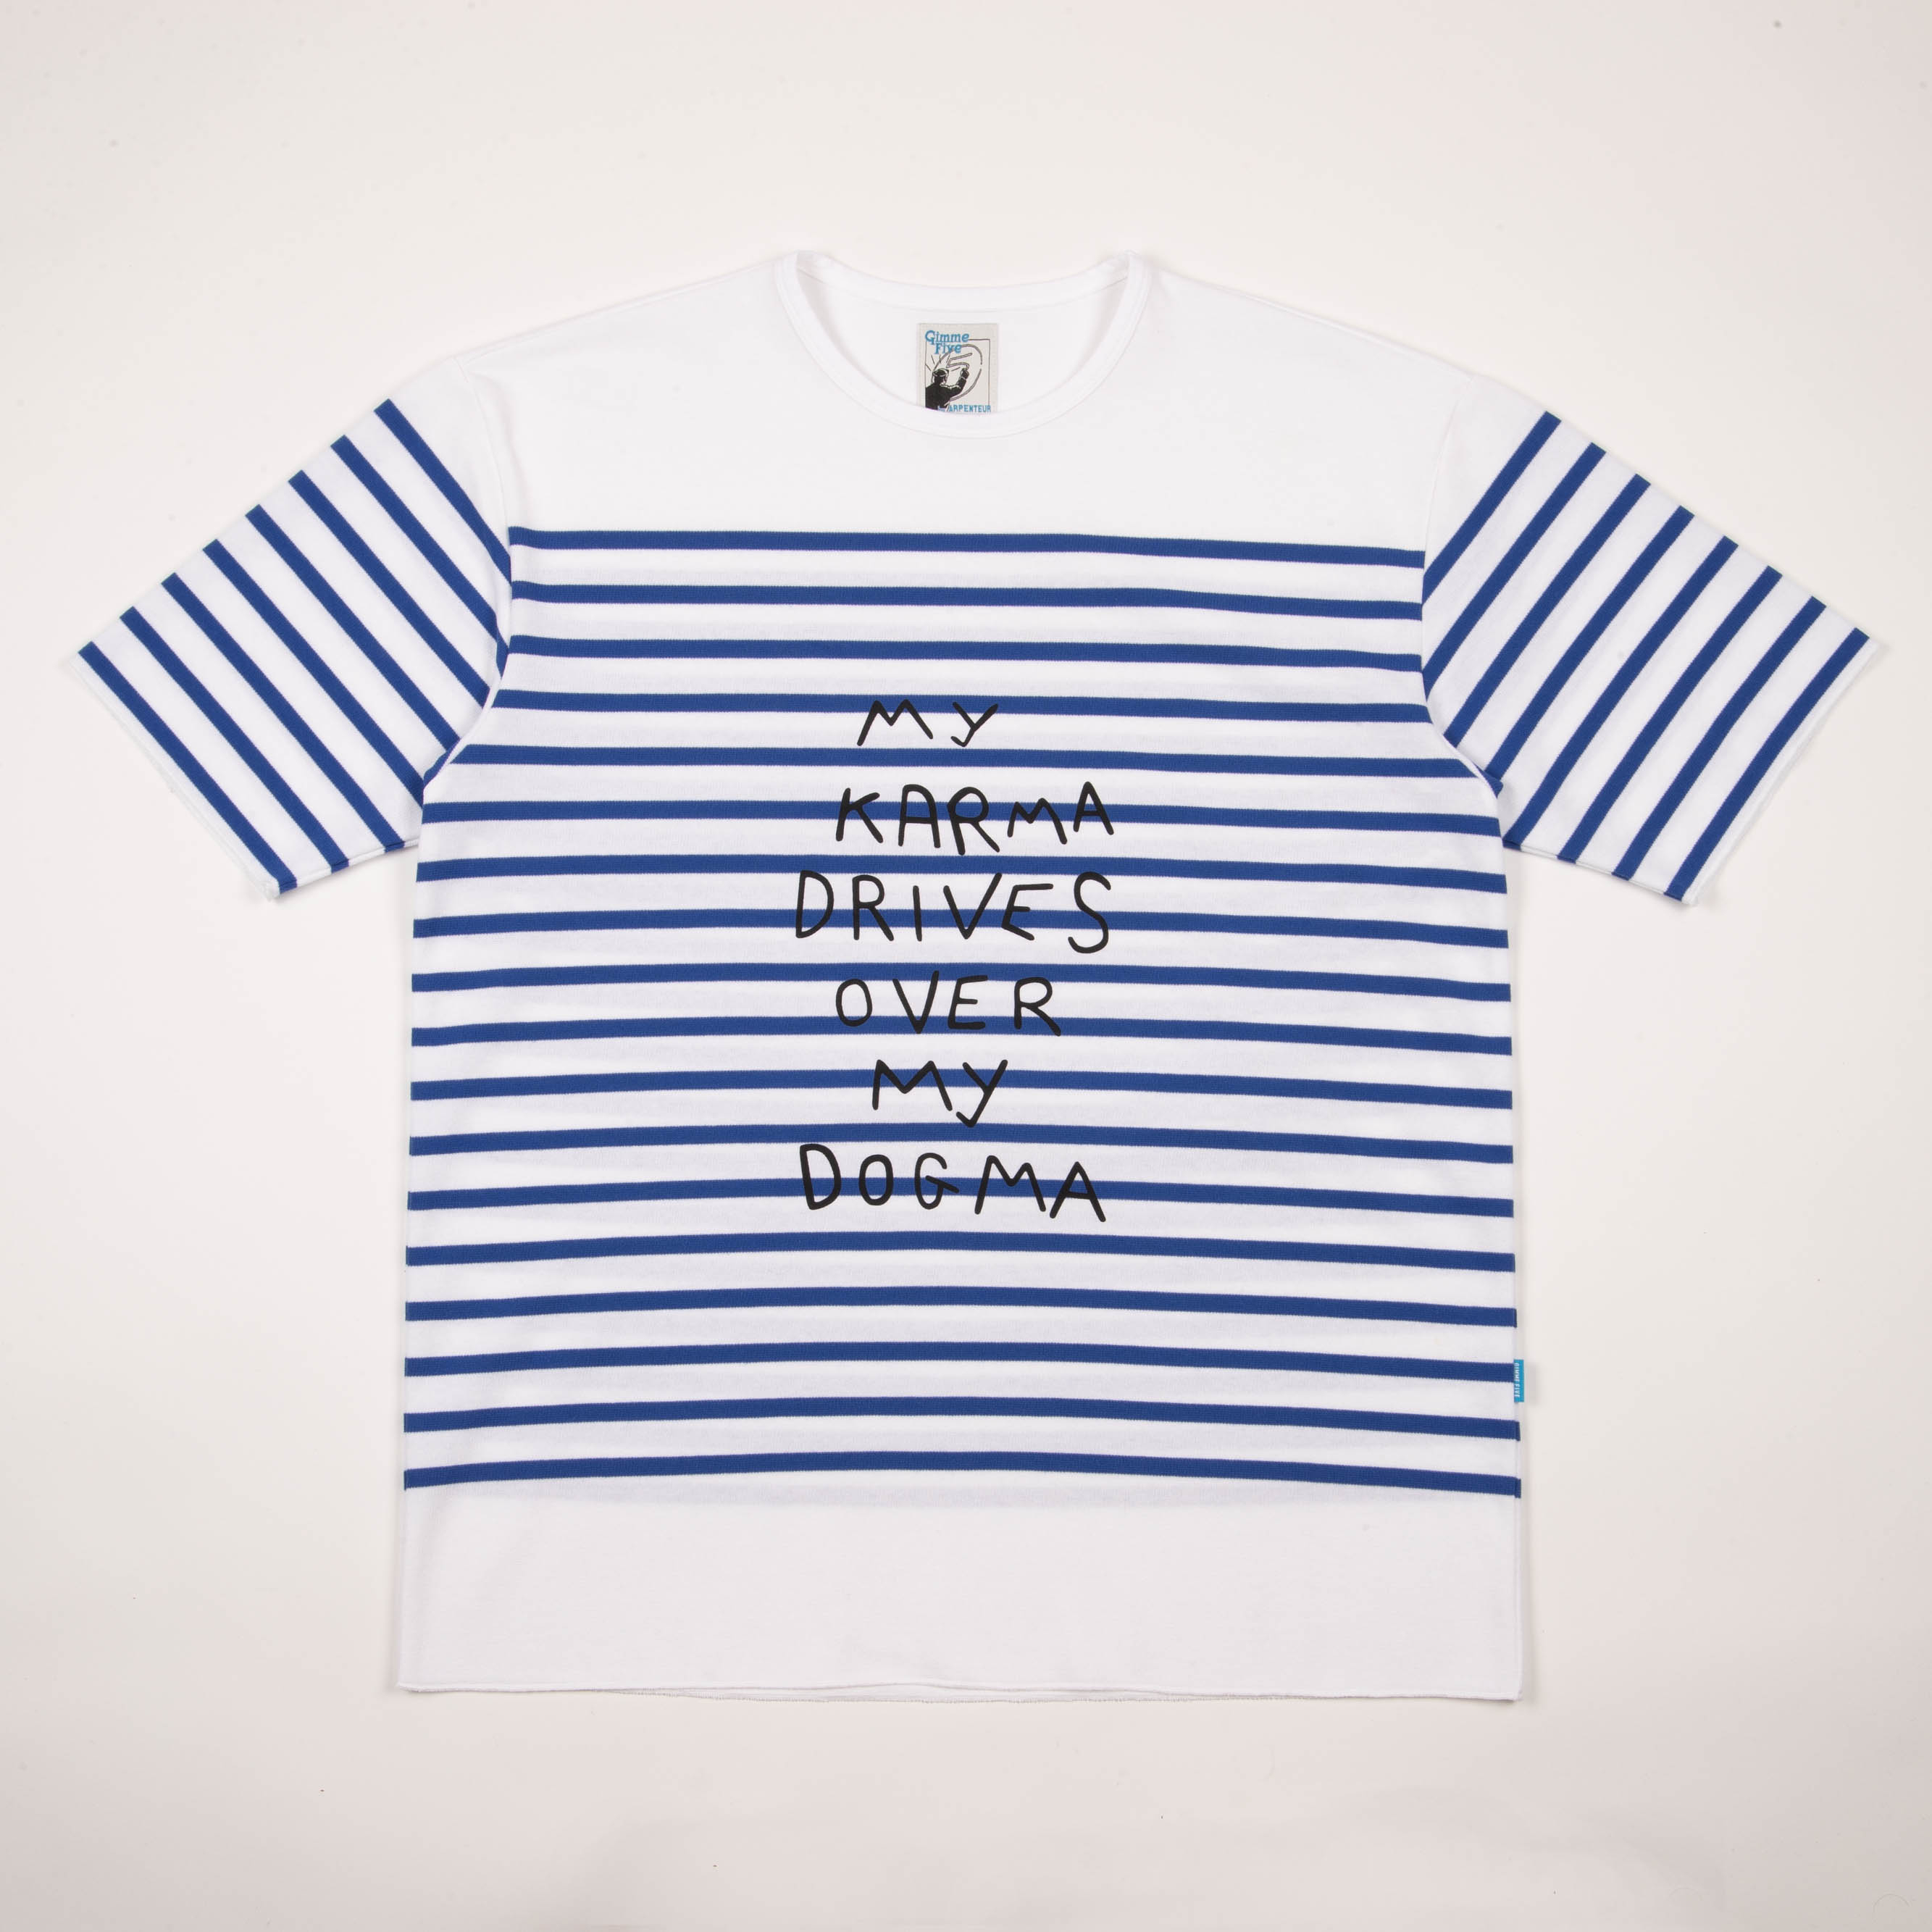 Special RACHEL S/S T-shirt in White/Blue color by Arpenteur and Gimme5